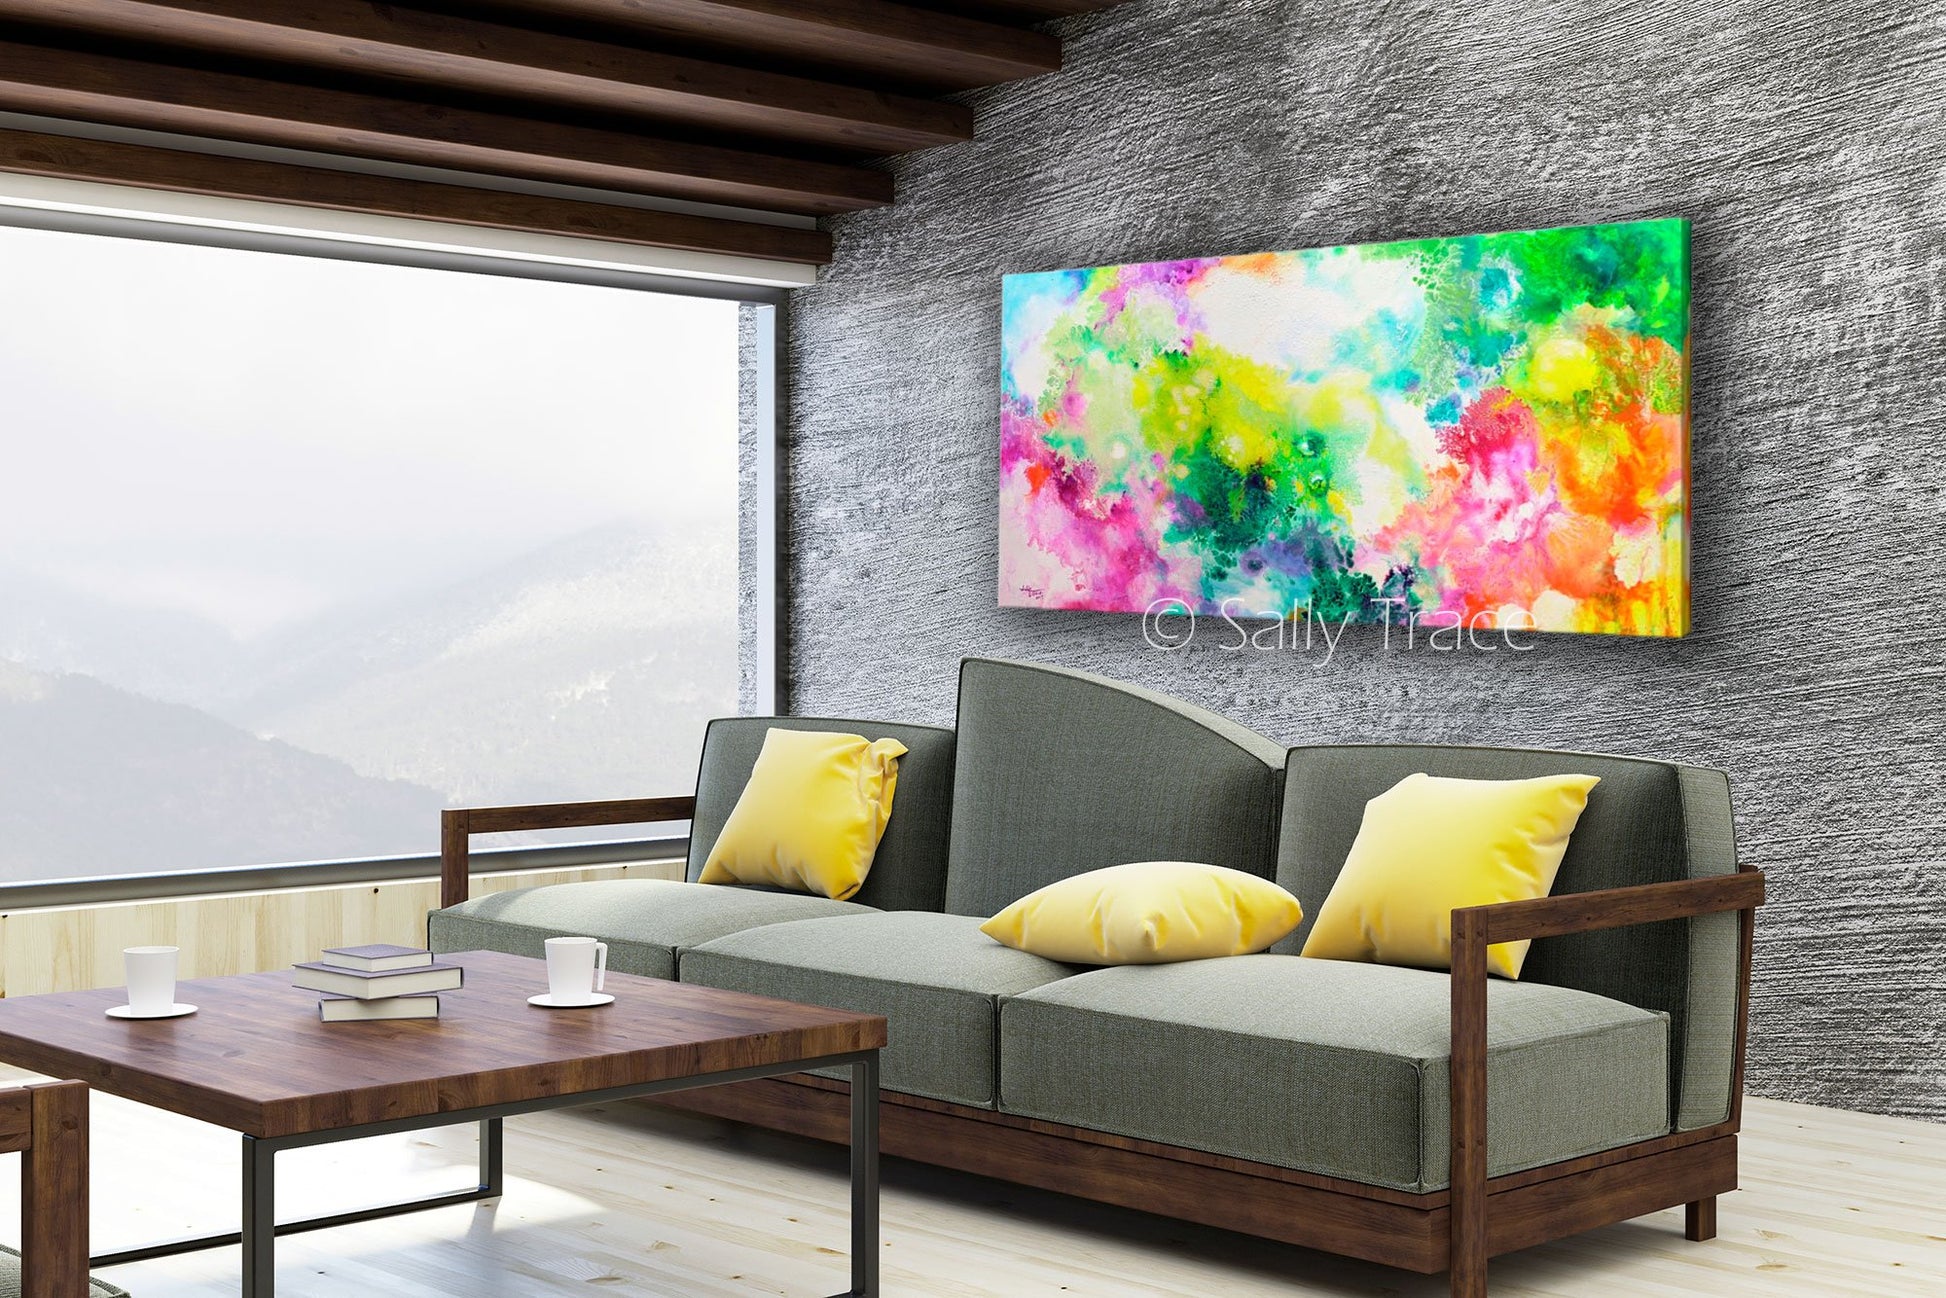 Ethereal Resonance, giclee print on stretched canvas from the original fluid painting by Sally Trace, room view